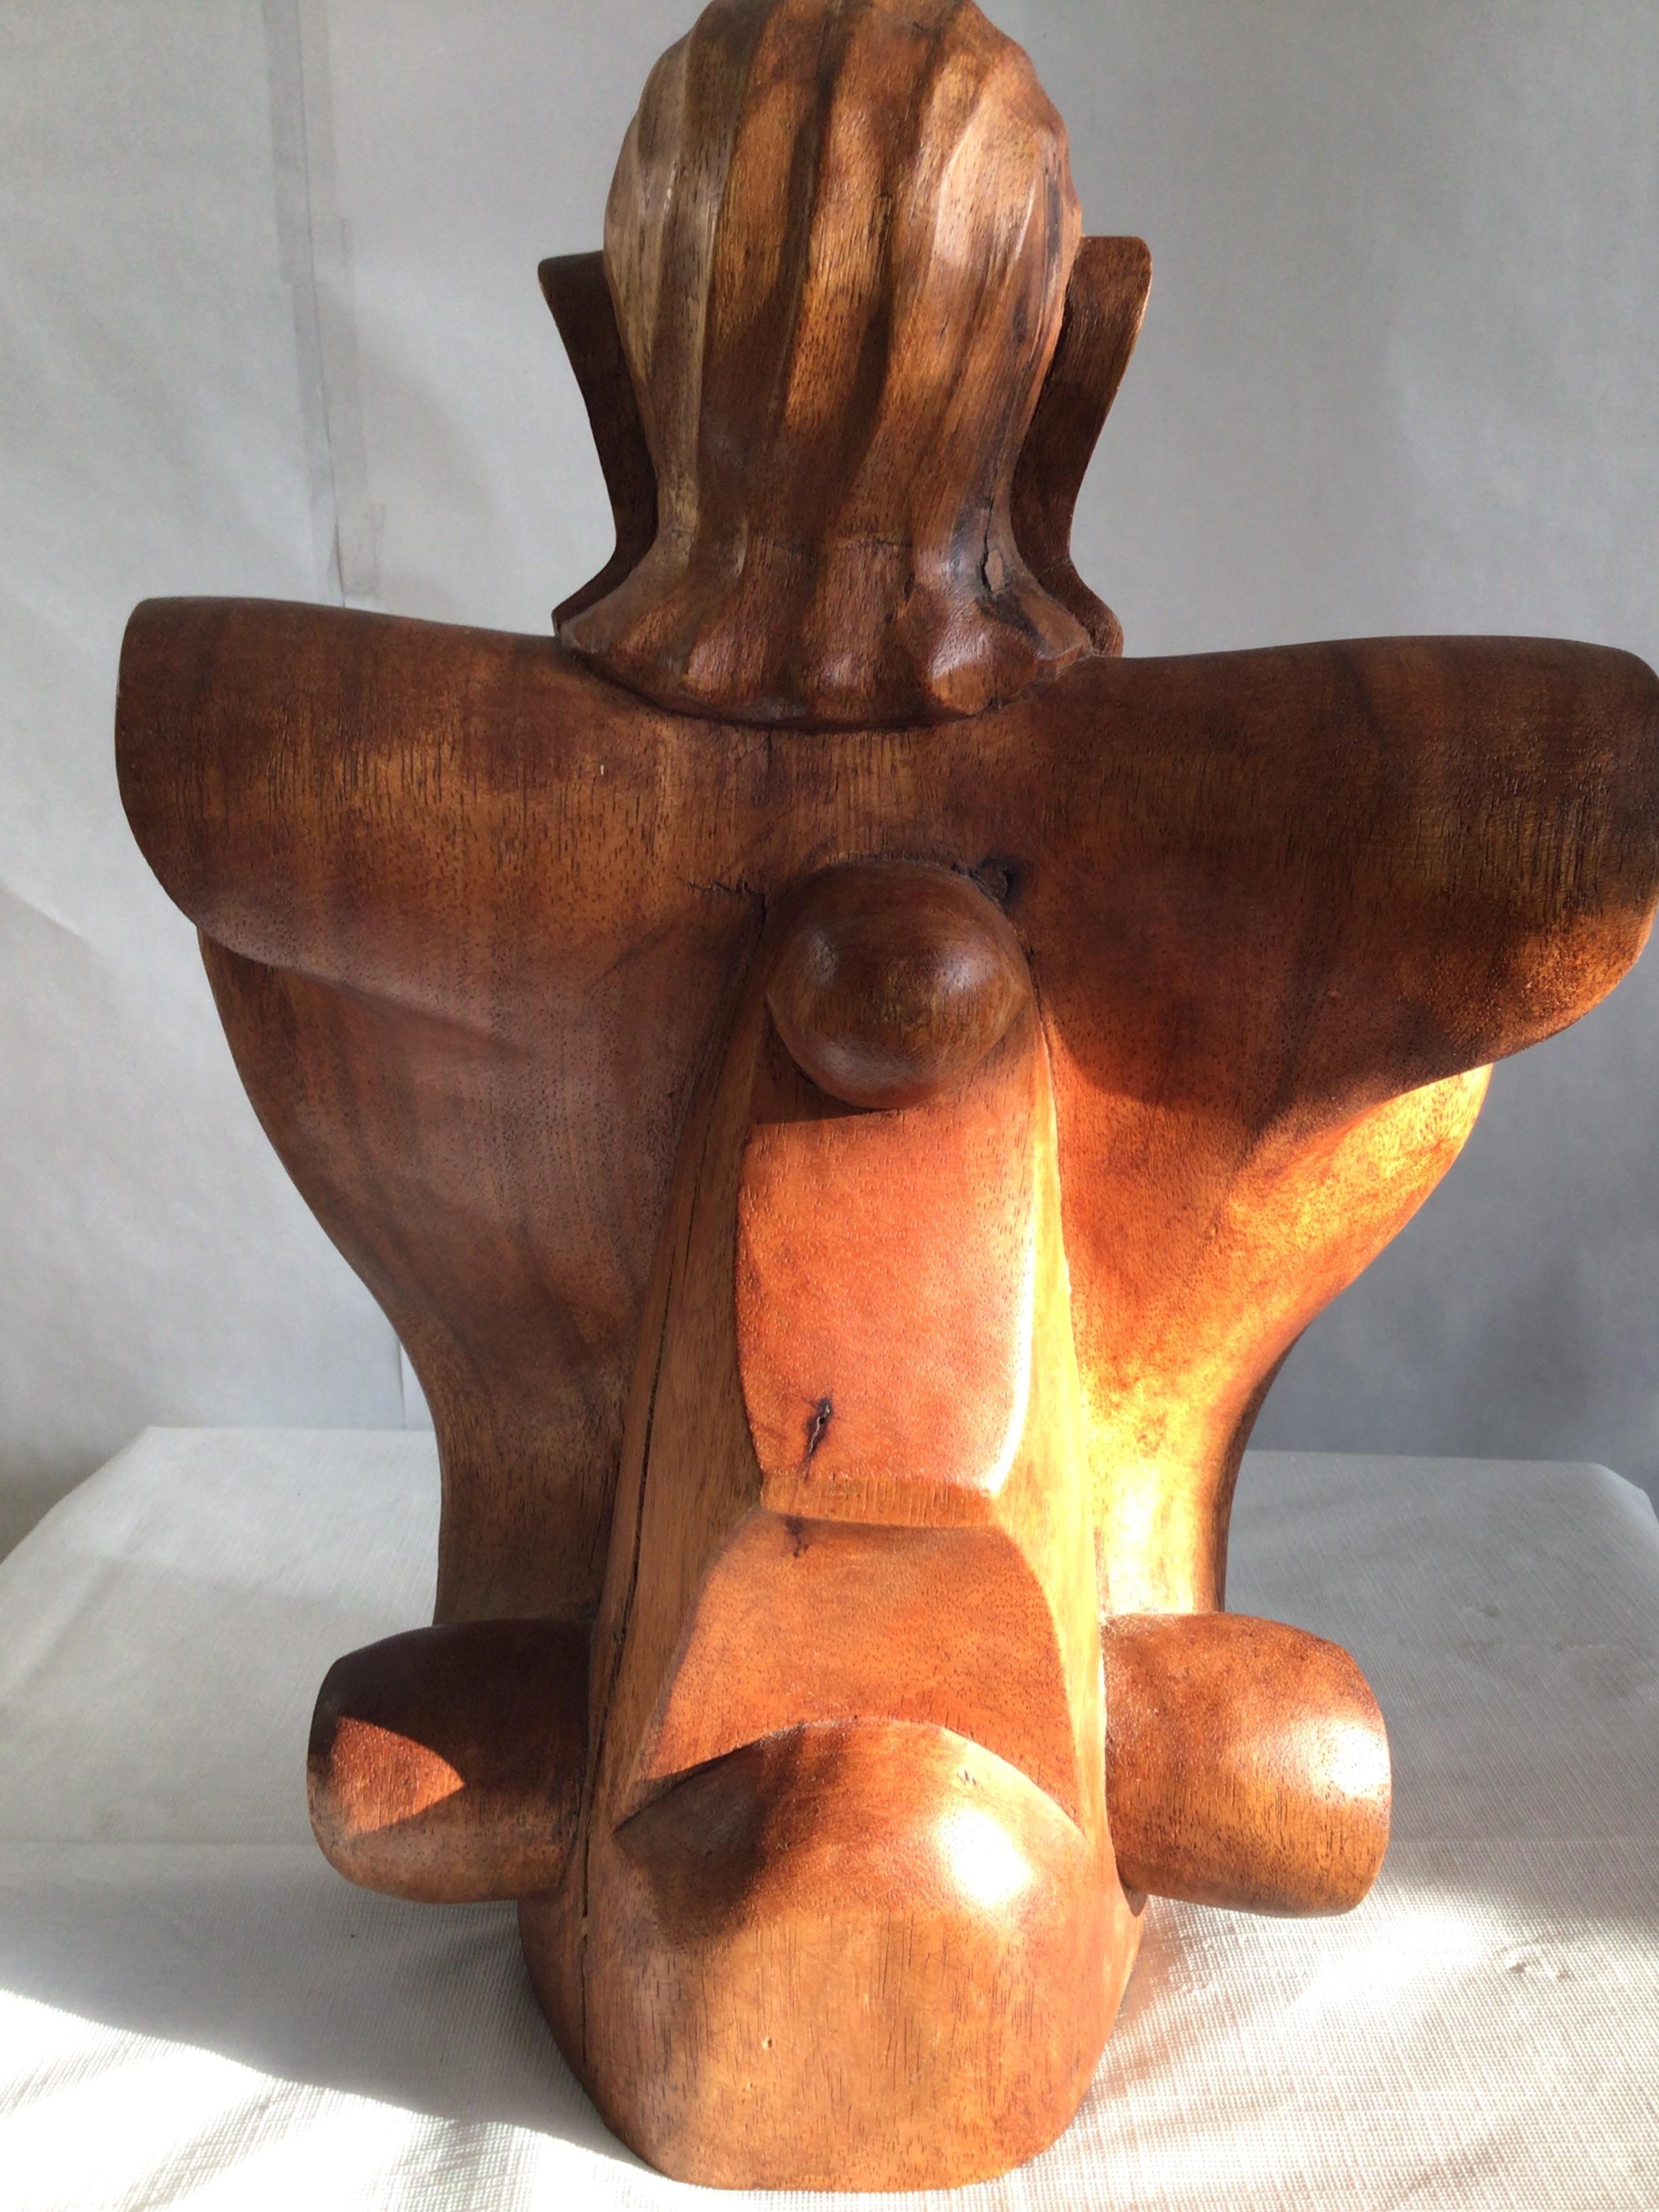 1950s Wood Sculpture of Woman In Good Condition For Sale In Tarrytown, NY